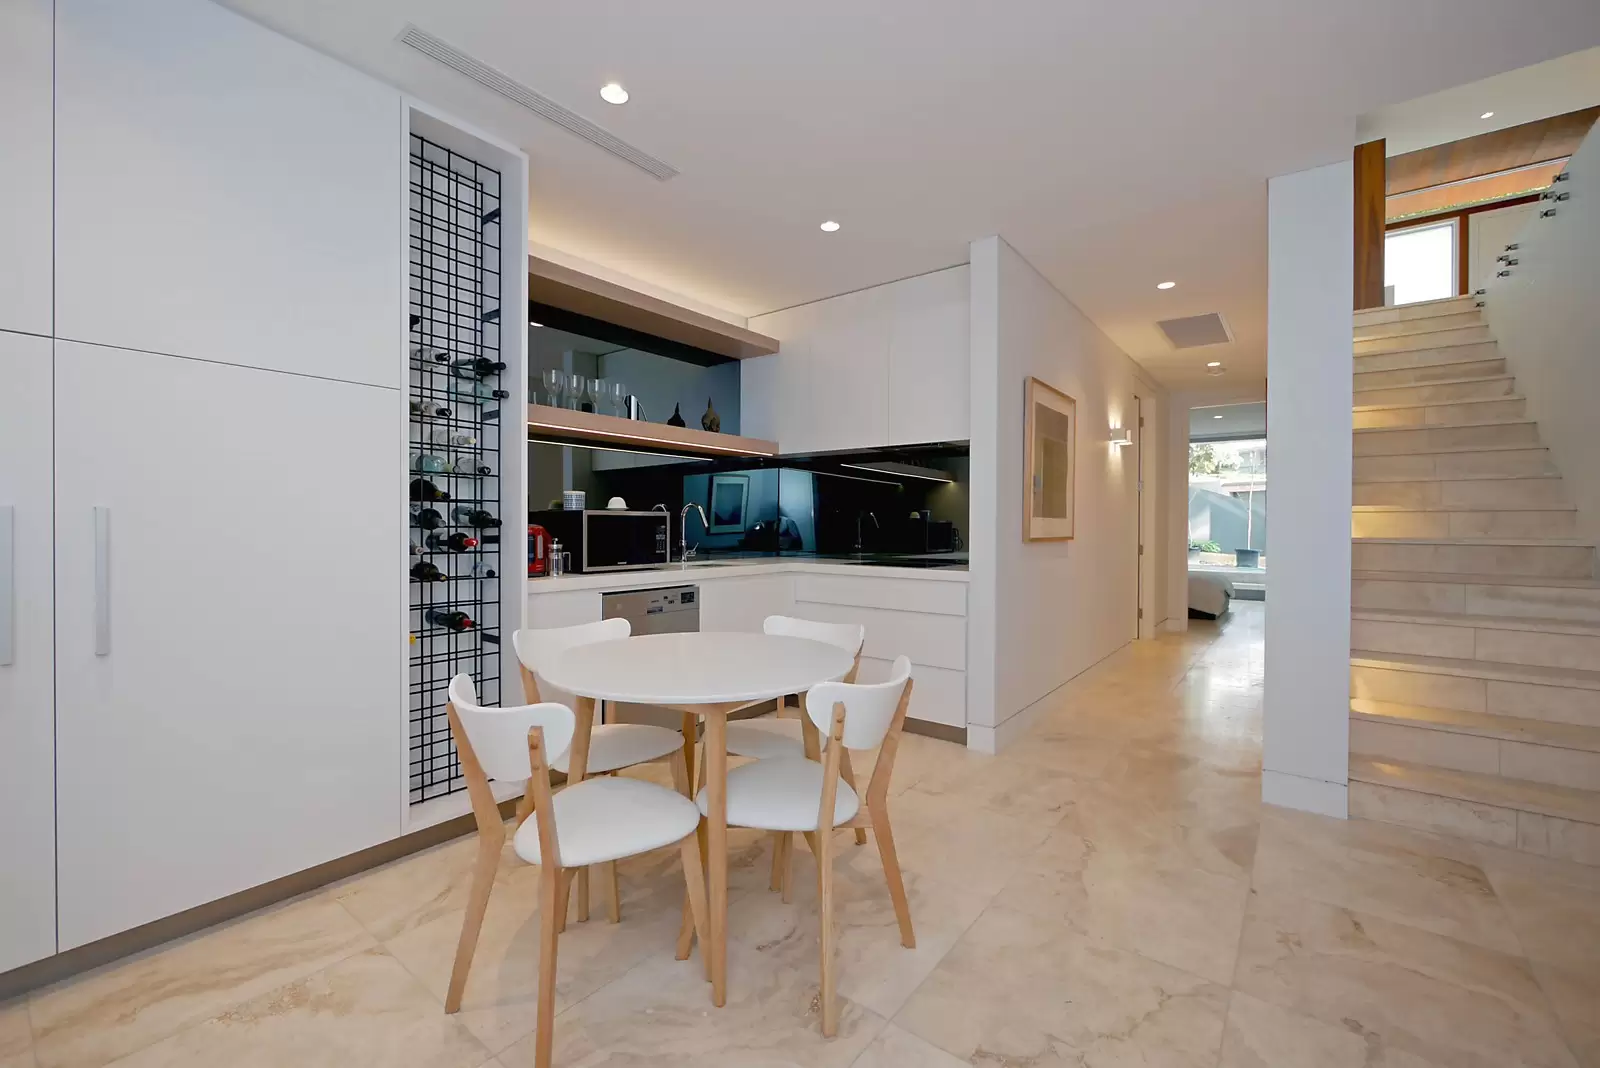 Photo #22: 23 Serpentine Parade, Vaucluse - Sold by Sydney Sotheby's International Realty